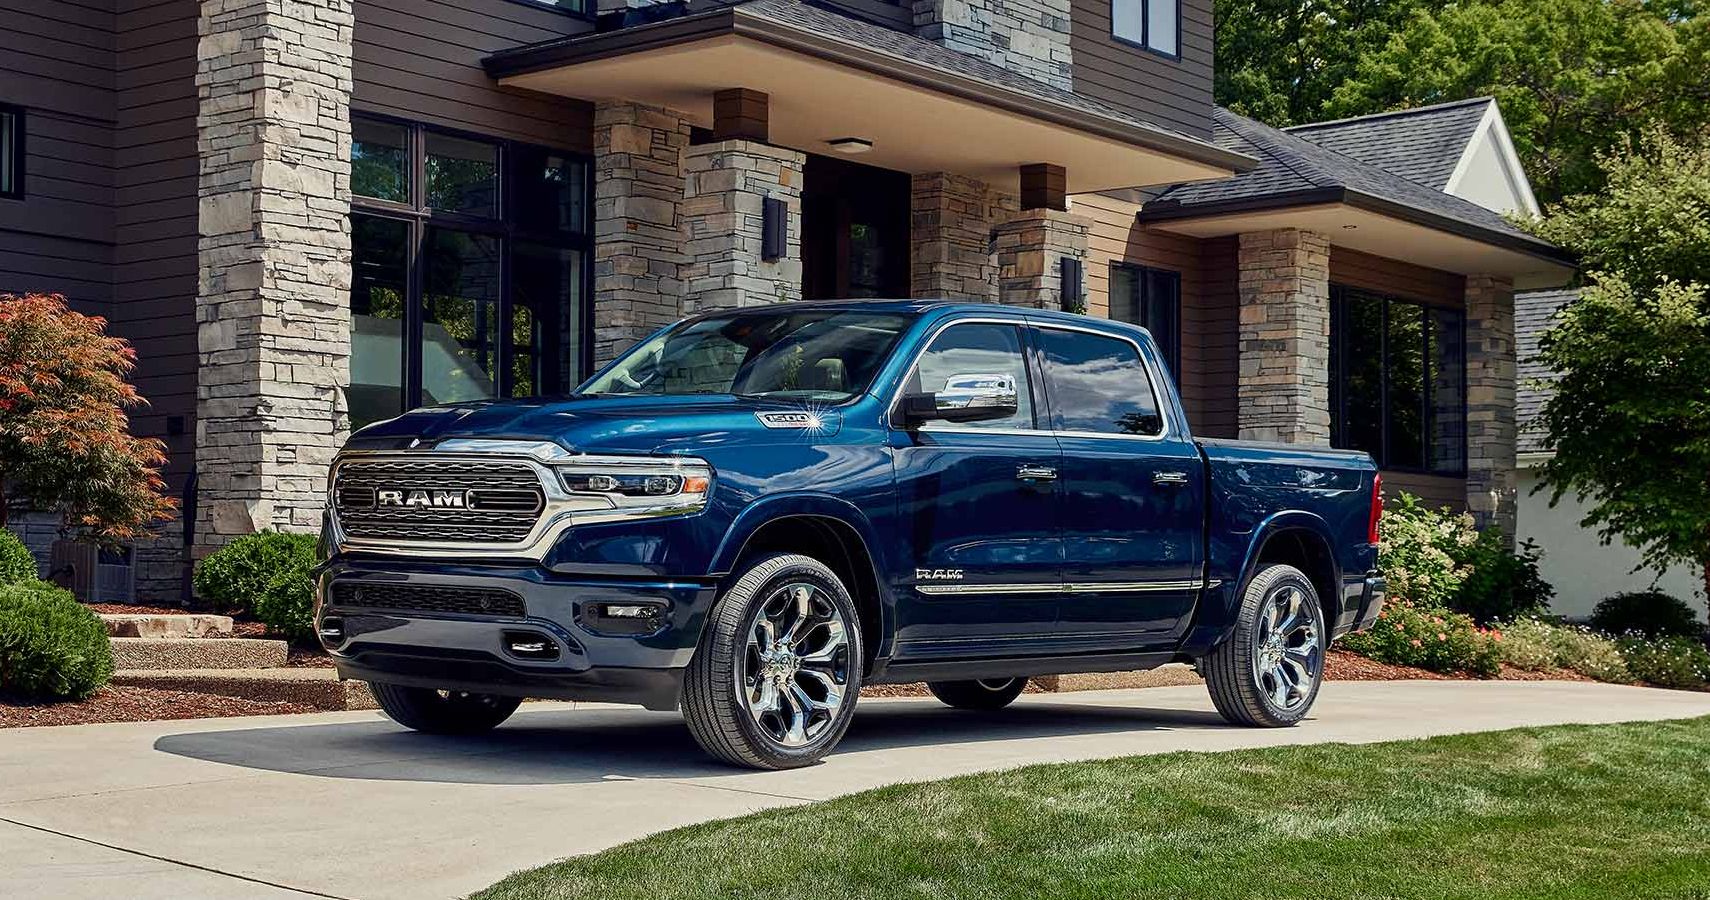 2023 Blue Ram 1500 front view 